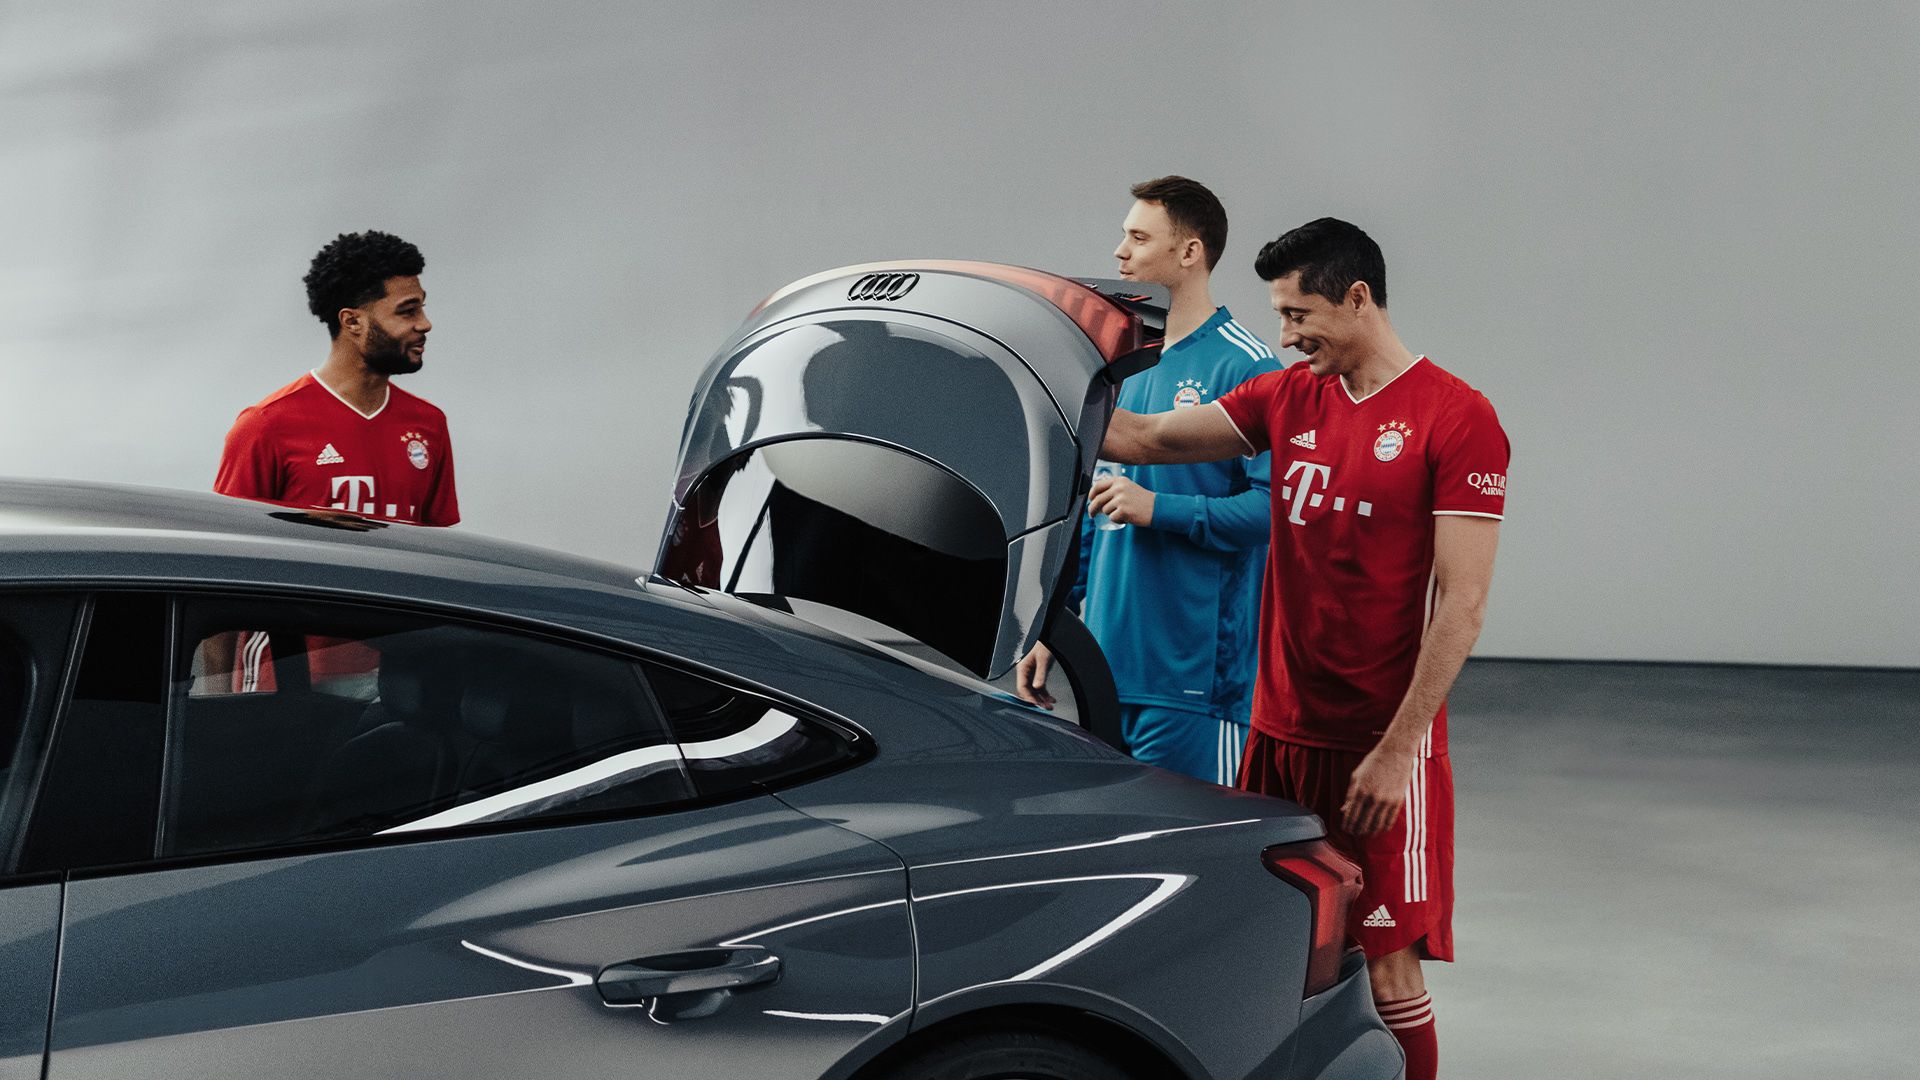 The picture shows the three FC Bayern Munich players Manuel Neuer, Robert Lewandowski and Serge Gnabry at the open trunk of the Audi RS e-tron GT.